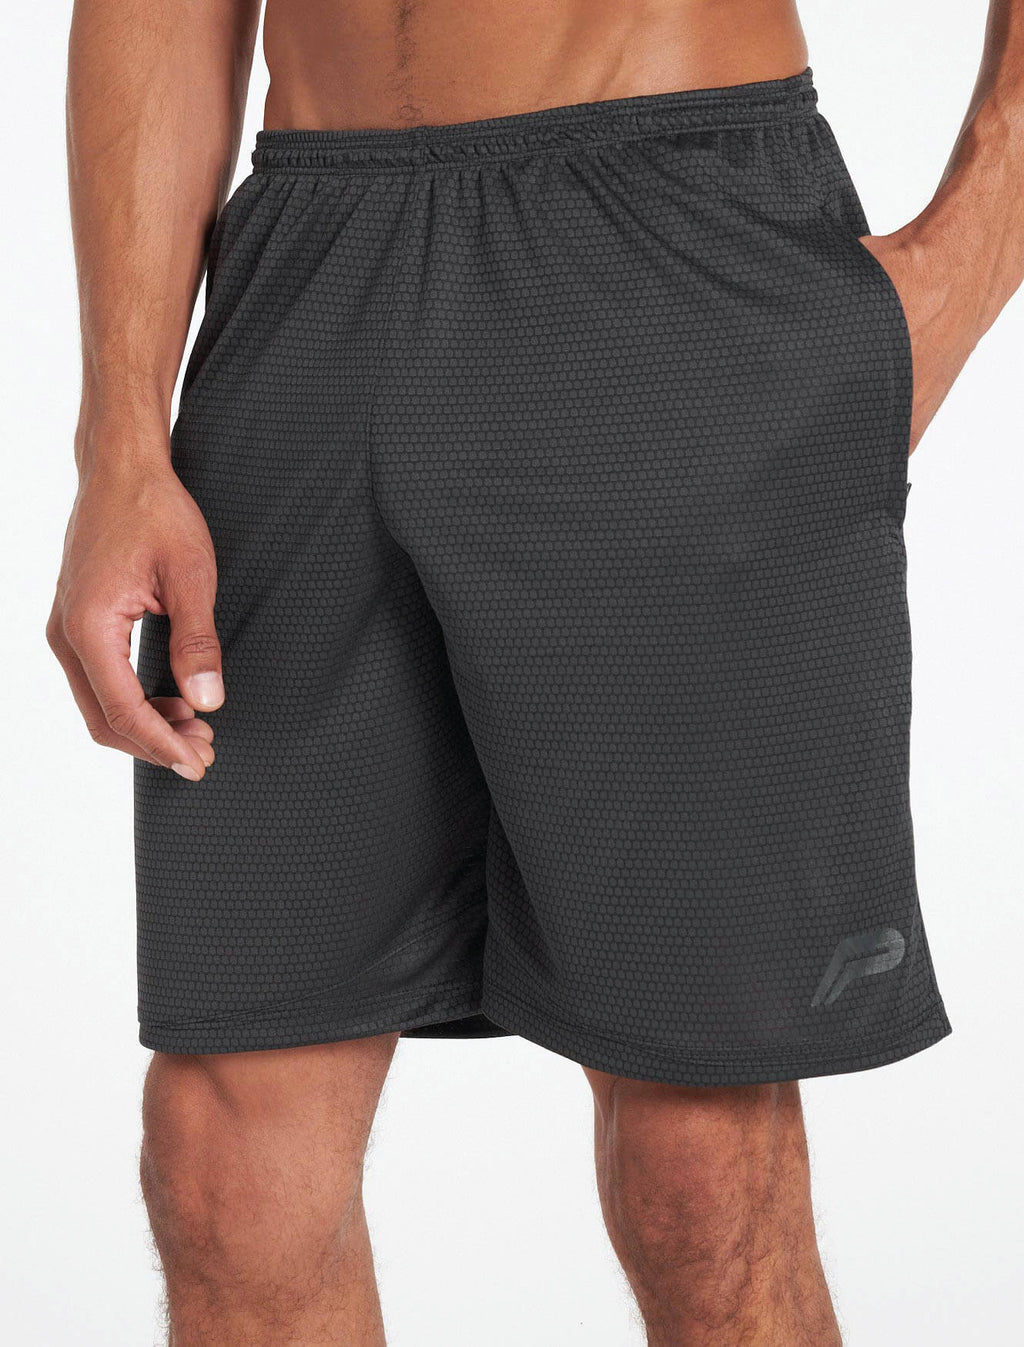 products/mens-allday-everyday-shorts-carbon-grey_5937dffc-9380-4e41-adee-21faa4806a86.jpg